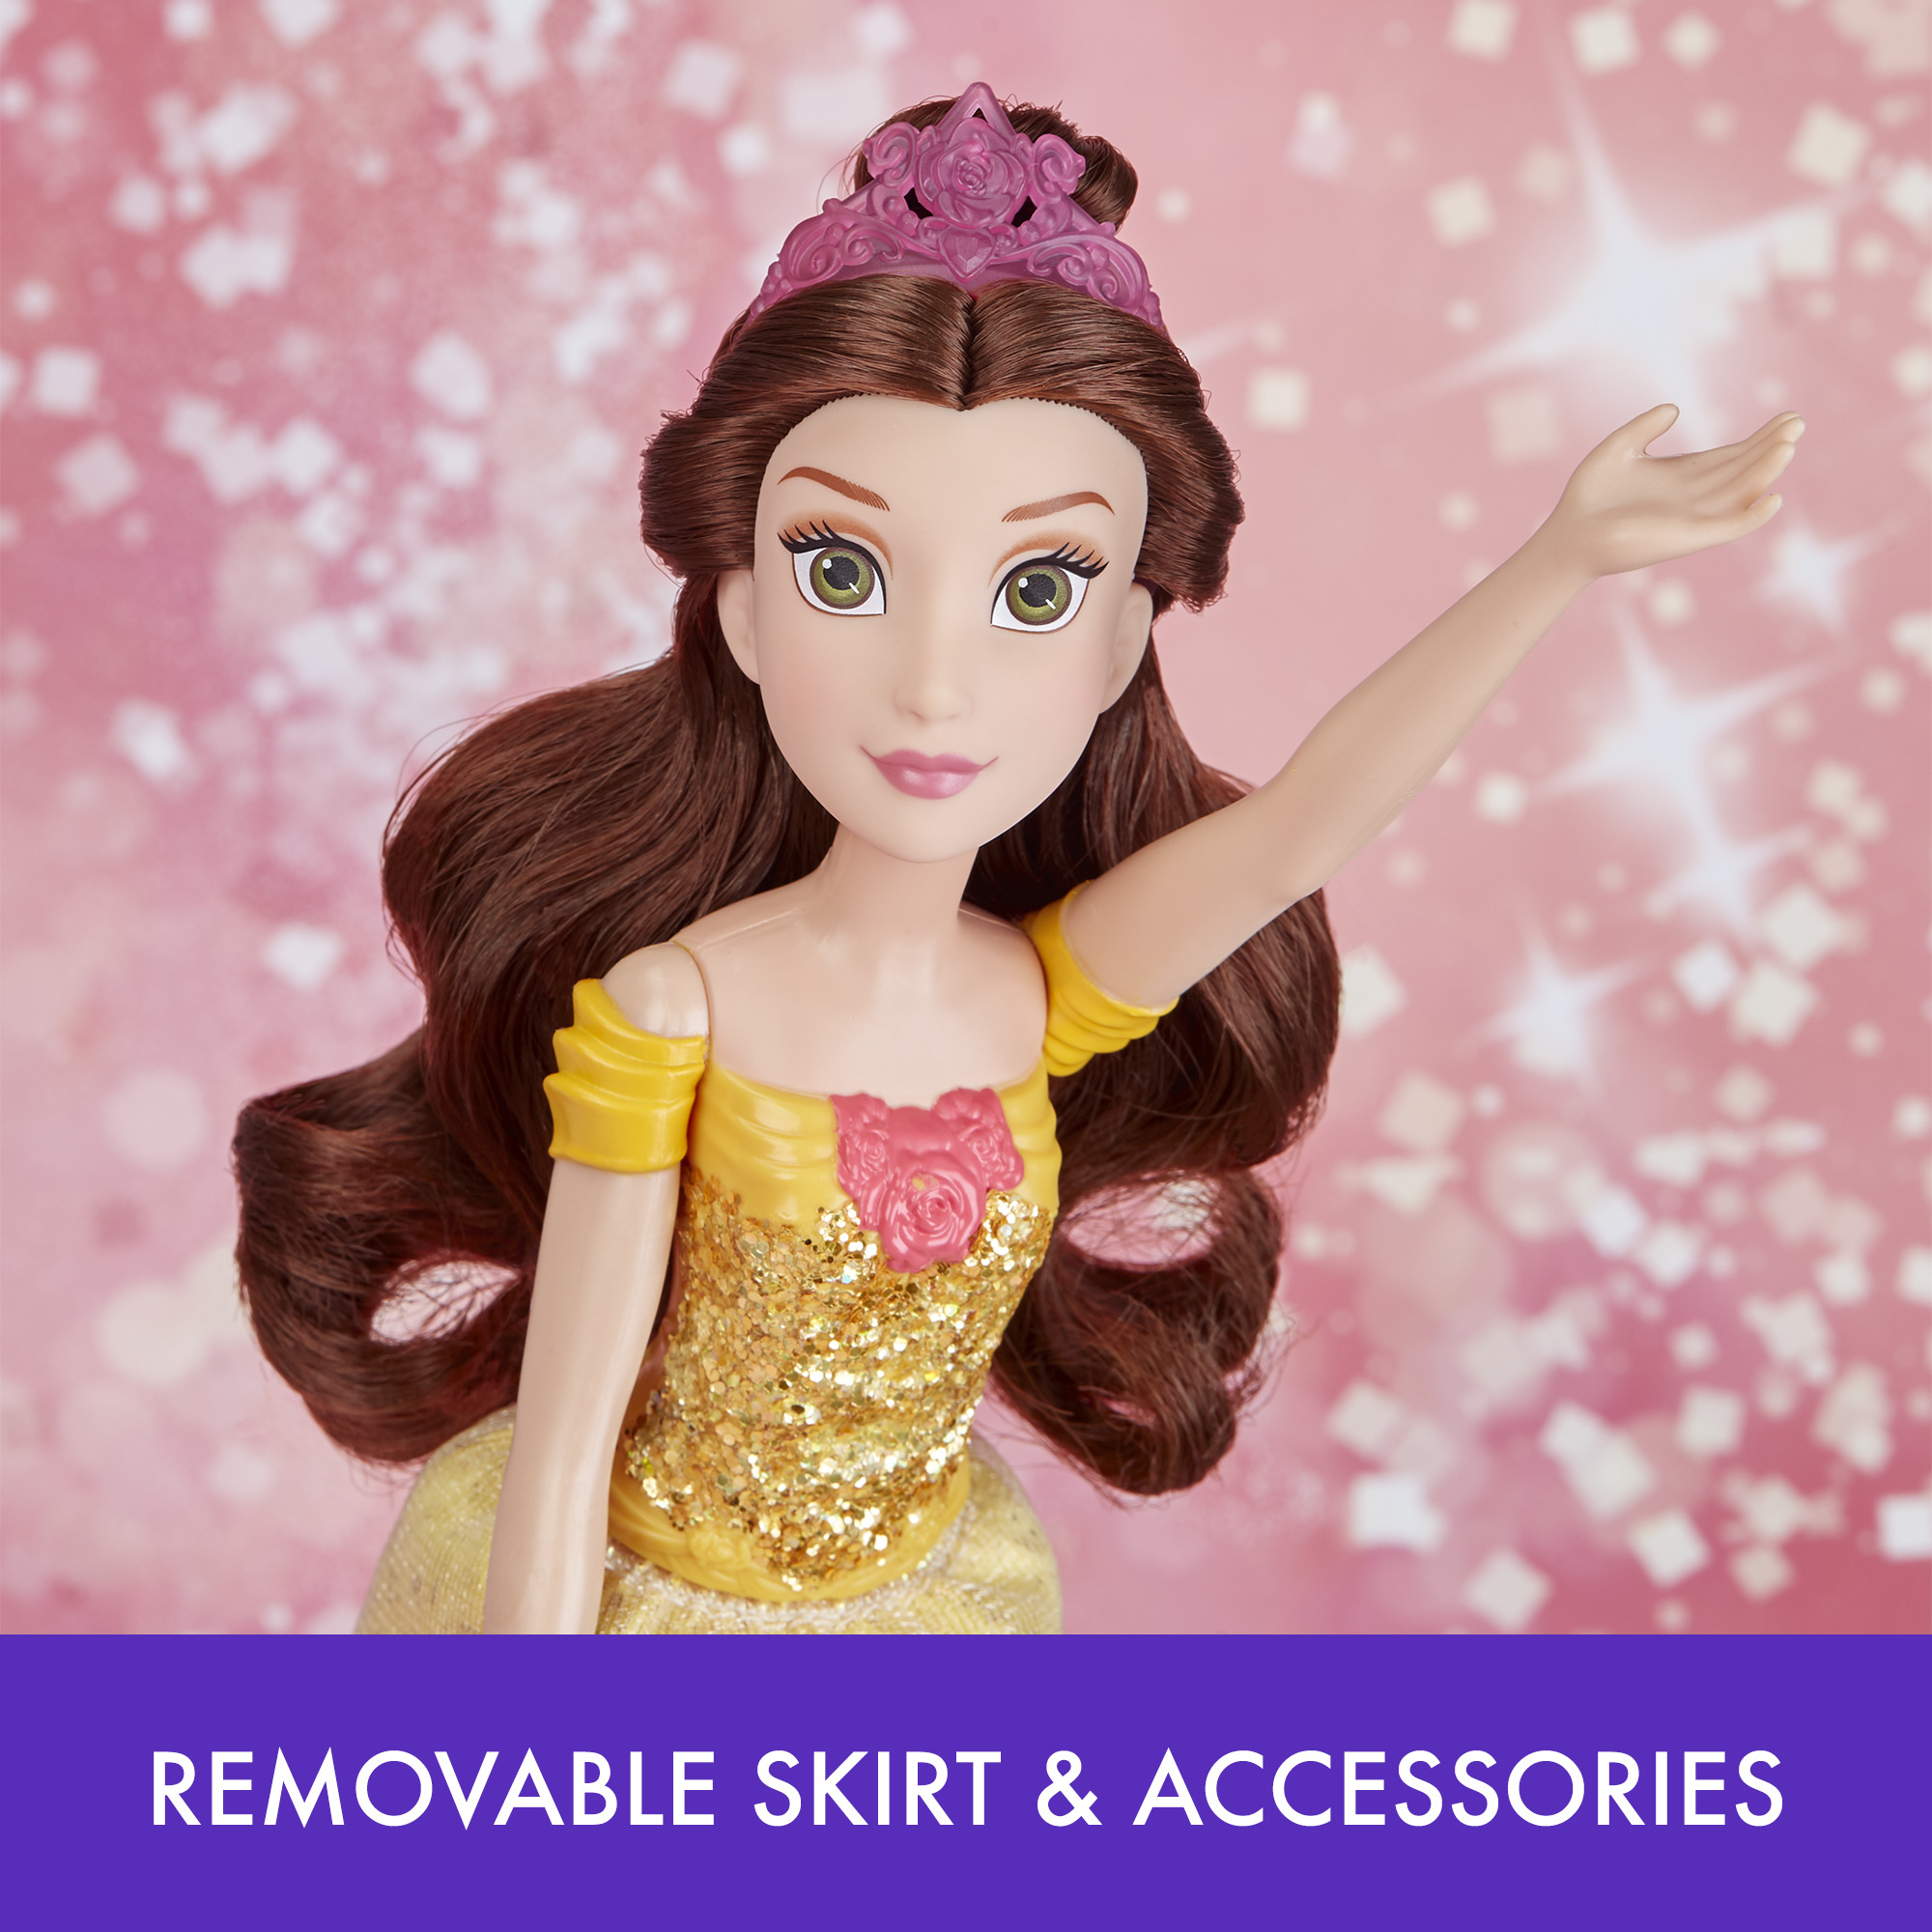 Disney Princess Royal Shimmer Belle with Sparkly Skirt, Includes Tiara and Shoes - image 8 of 16